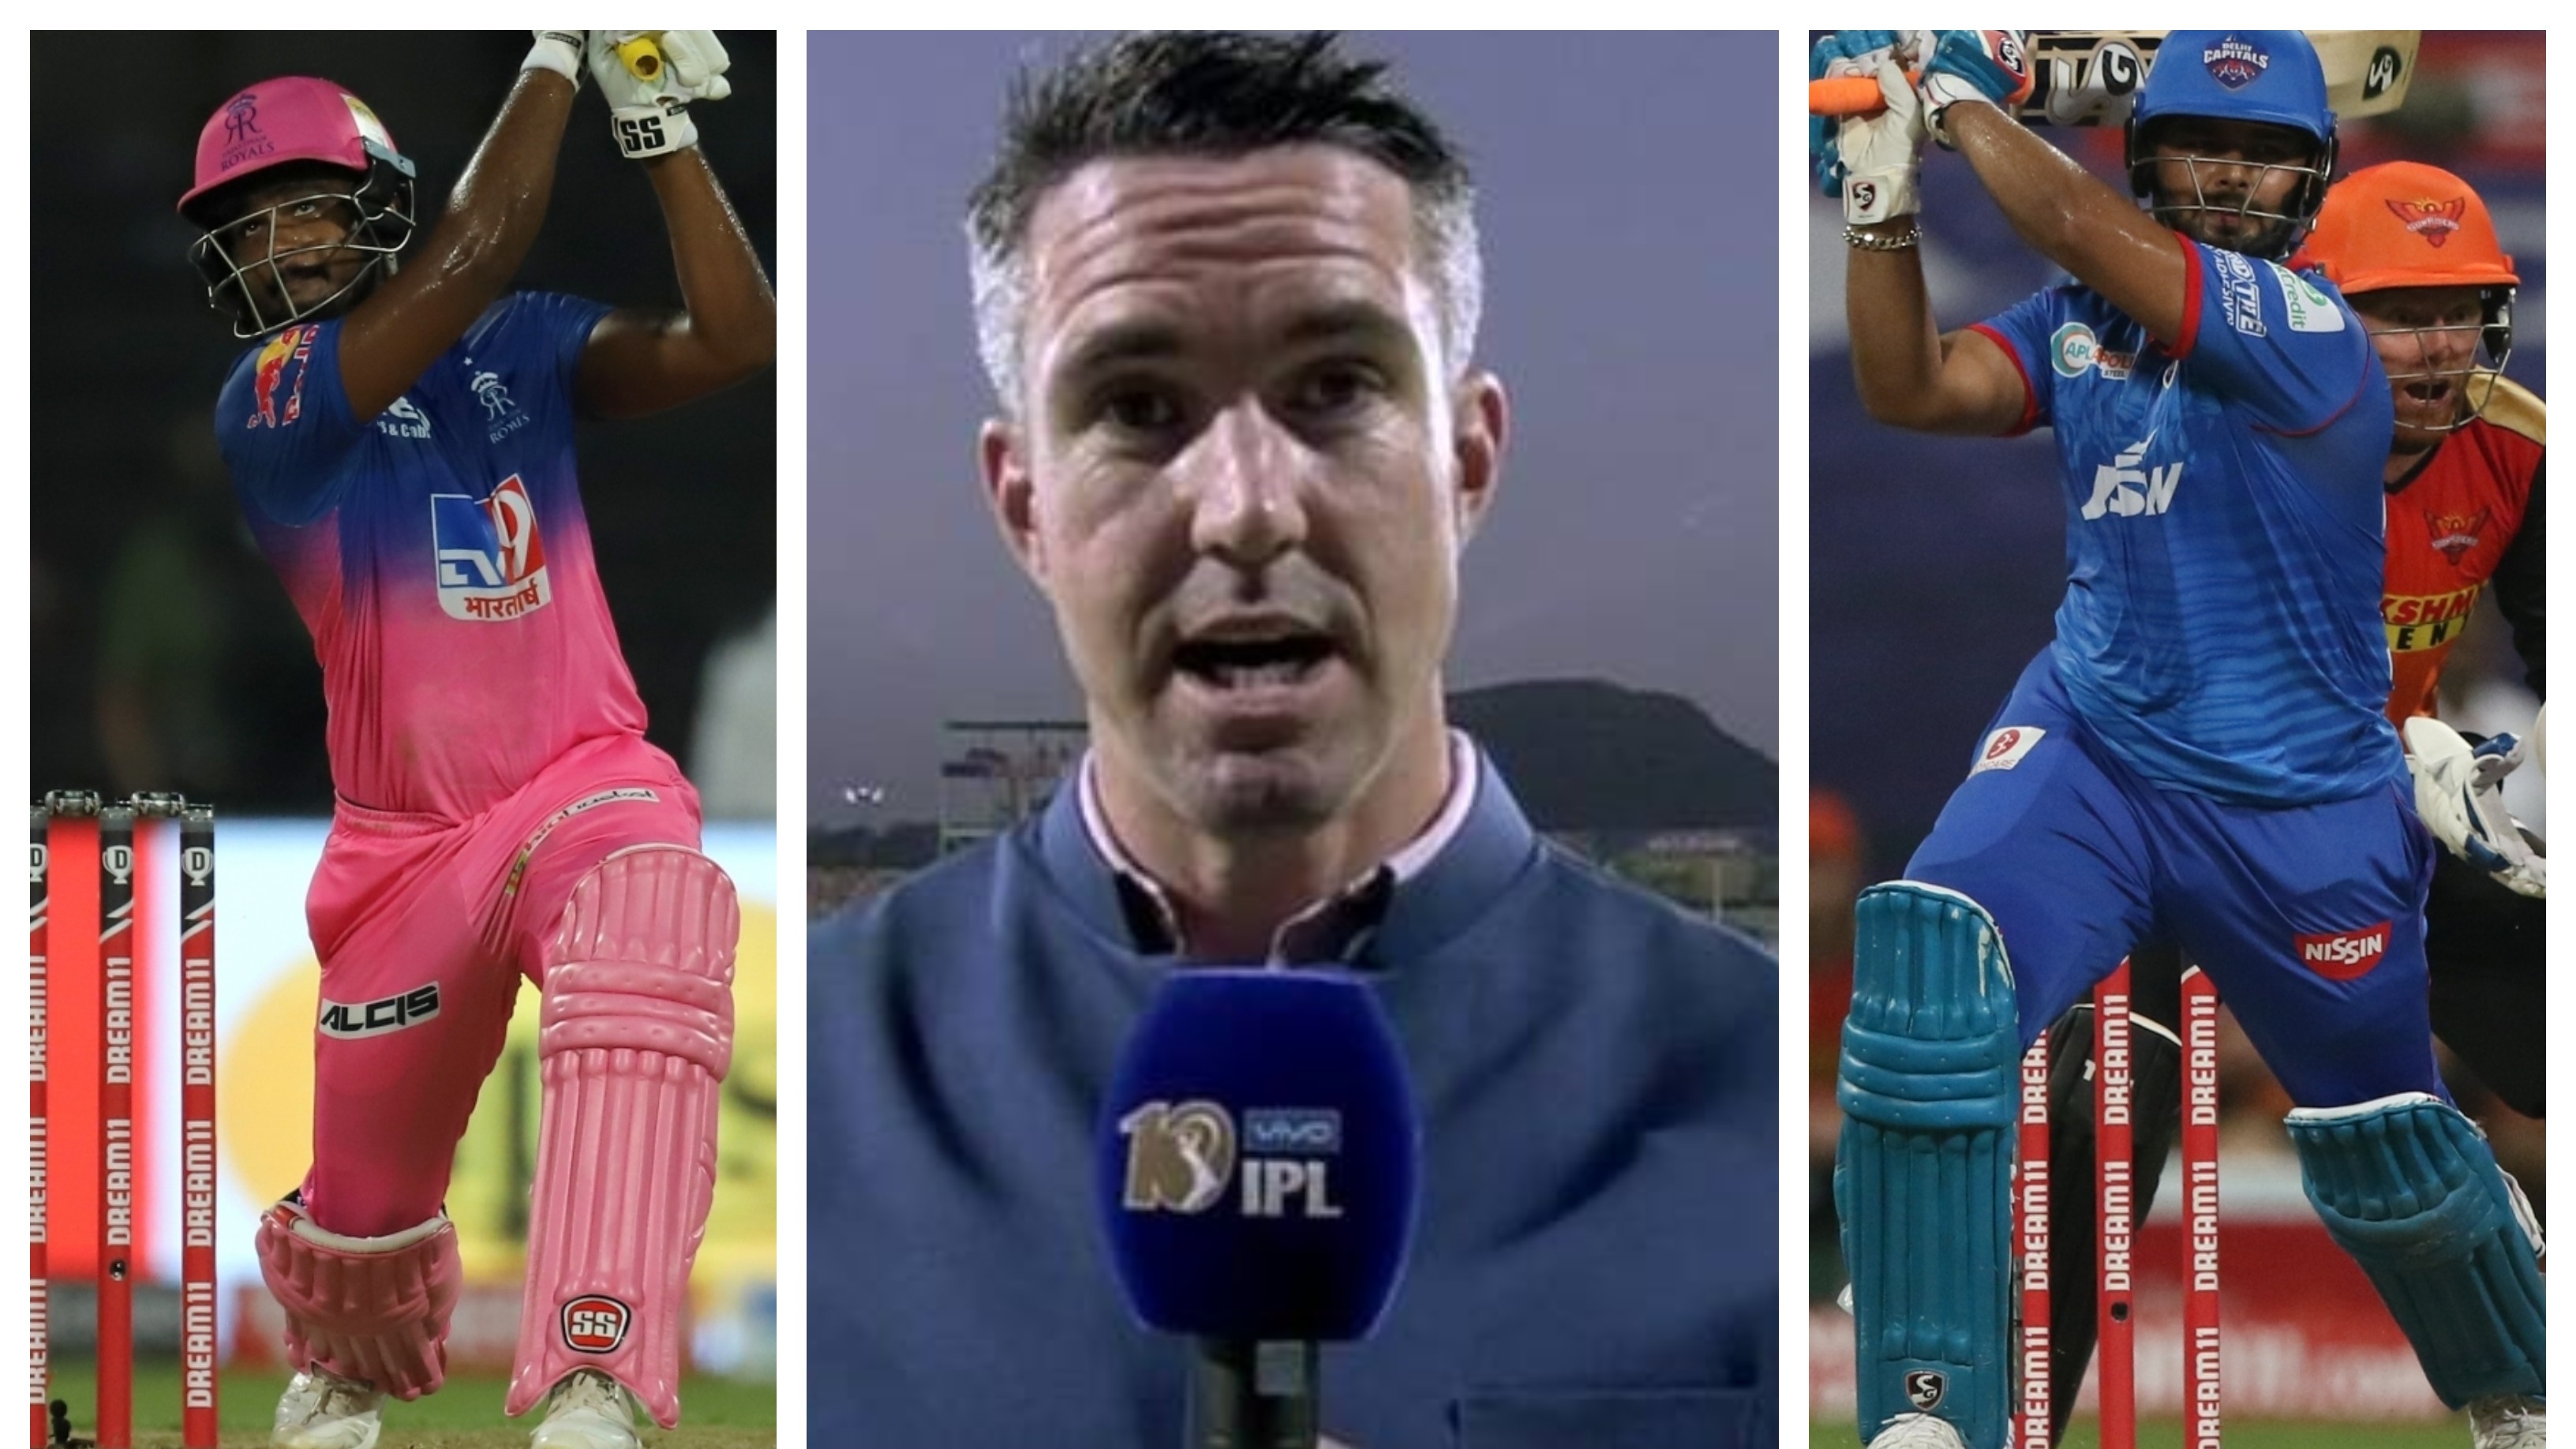 IPL 2020: Pietersen explains why he would pick Samson over Pant for India’s wicketkeeper slot